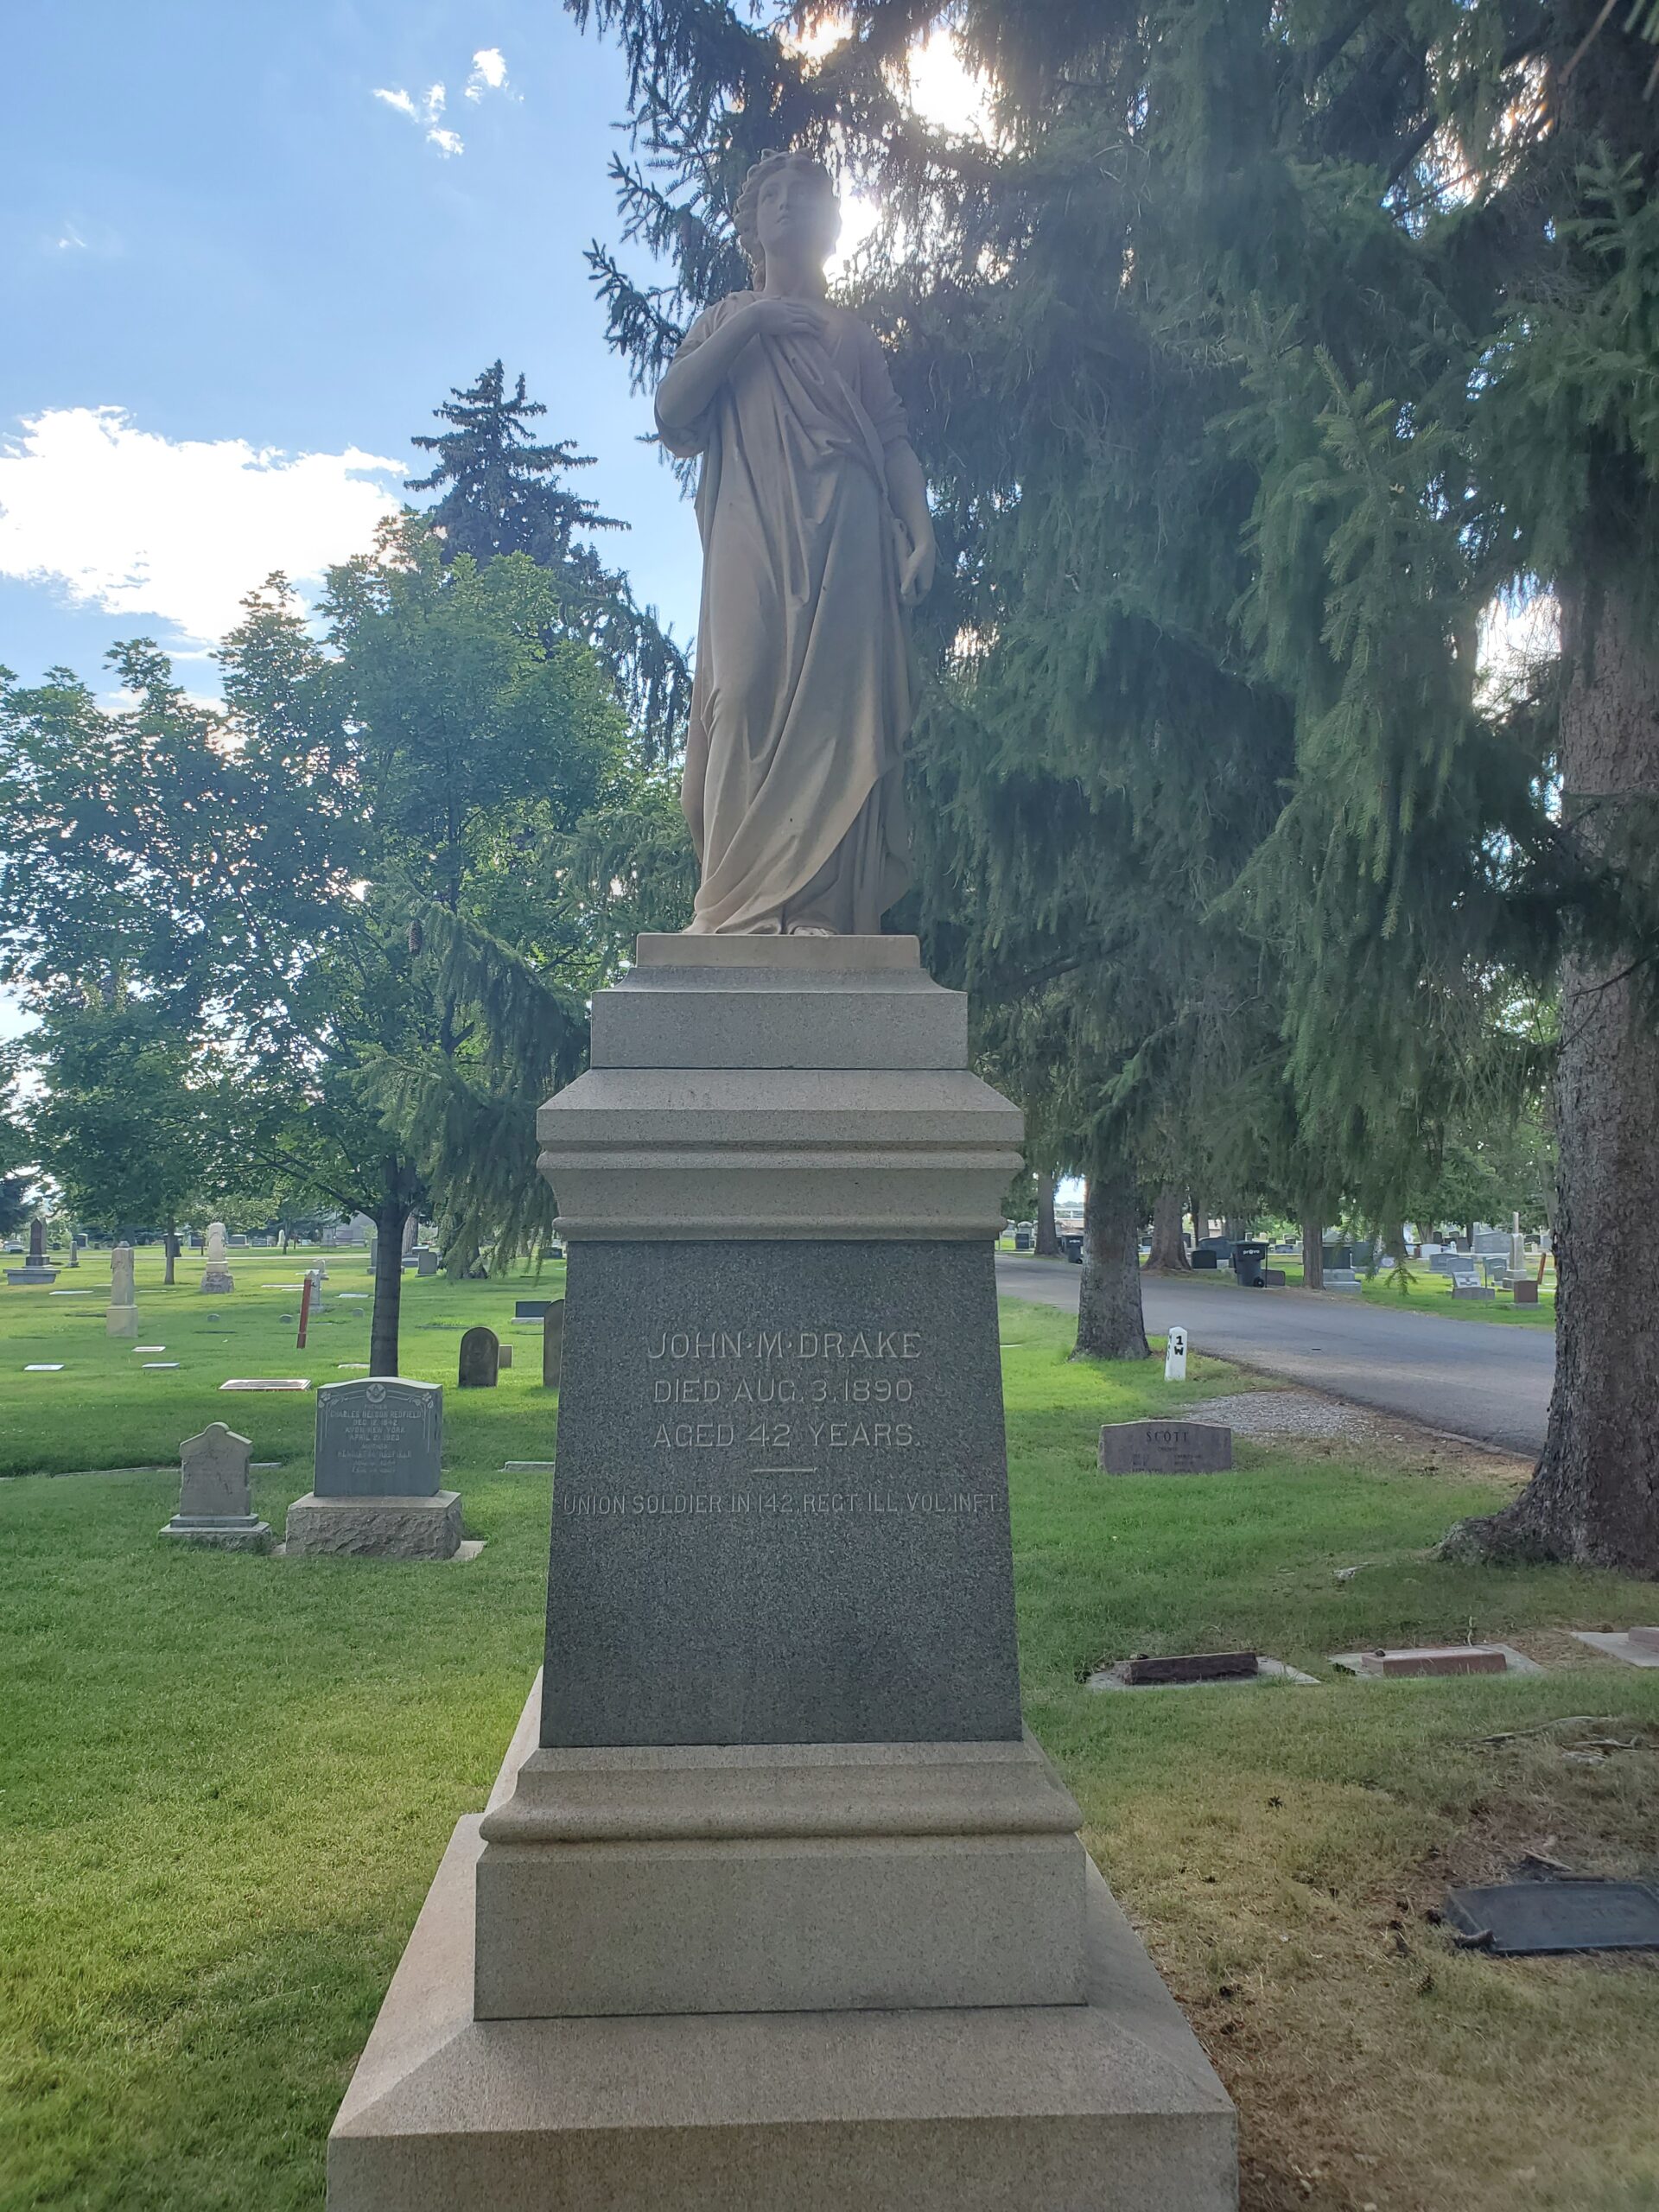 This grave is adorned with a white statue to top it